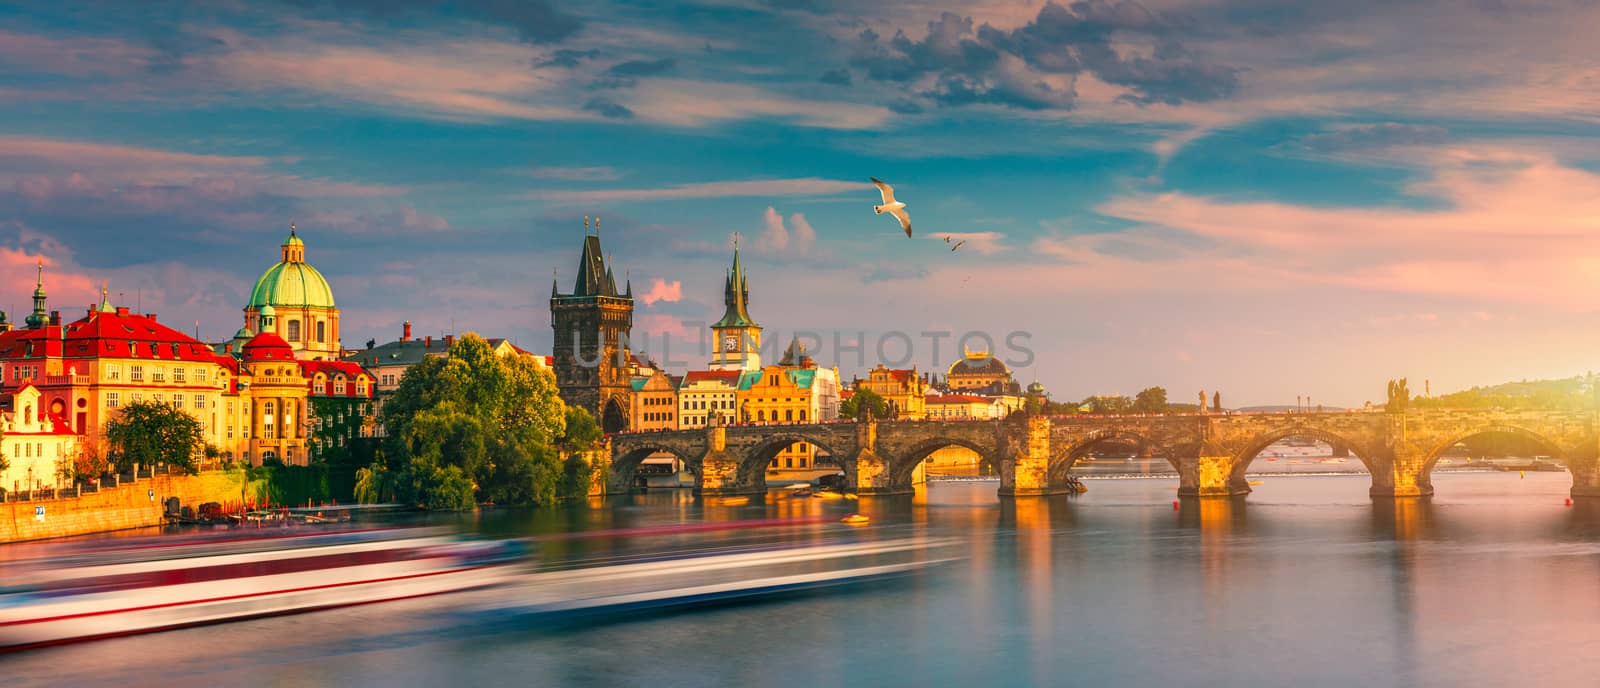 Charles Bridge, Old Town and Old Town Tower of Charles Bridge, P by DaLiu